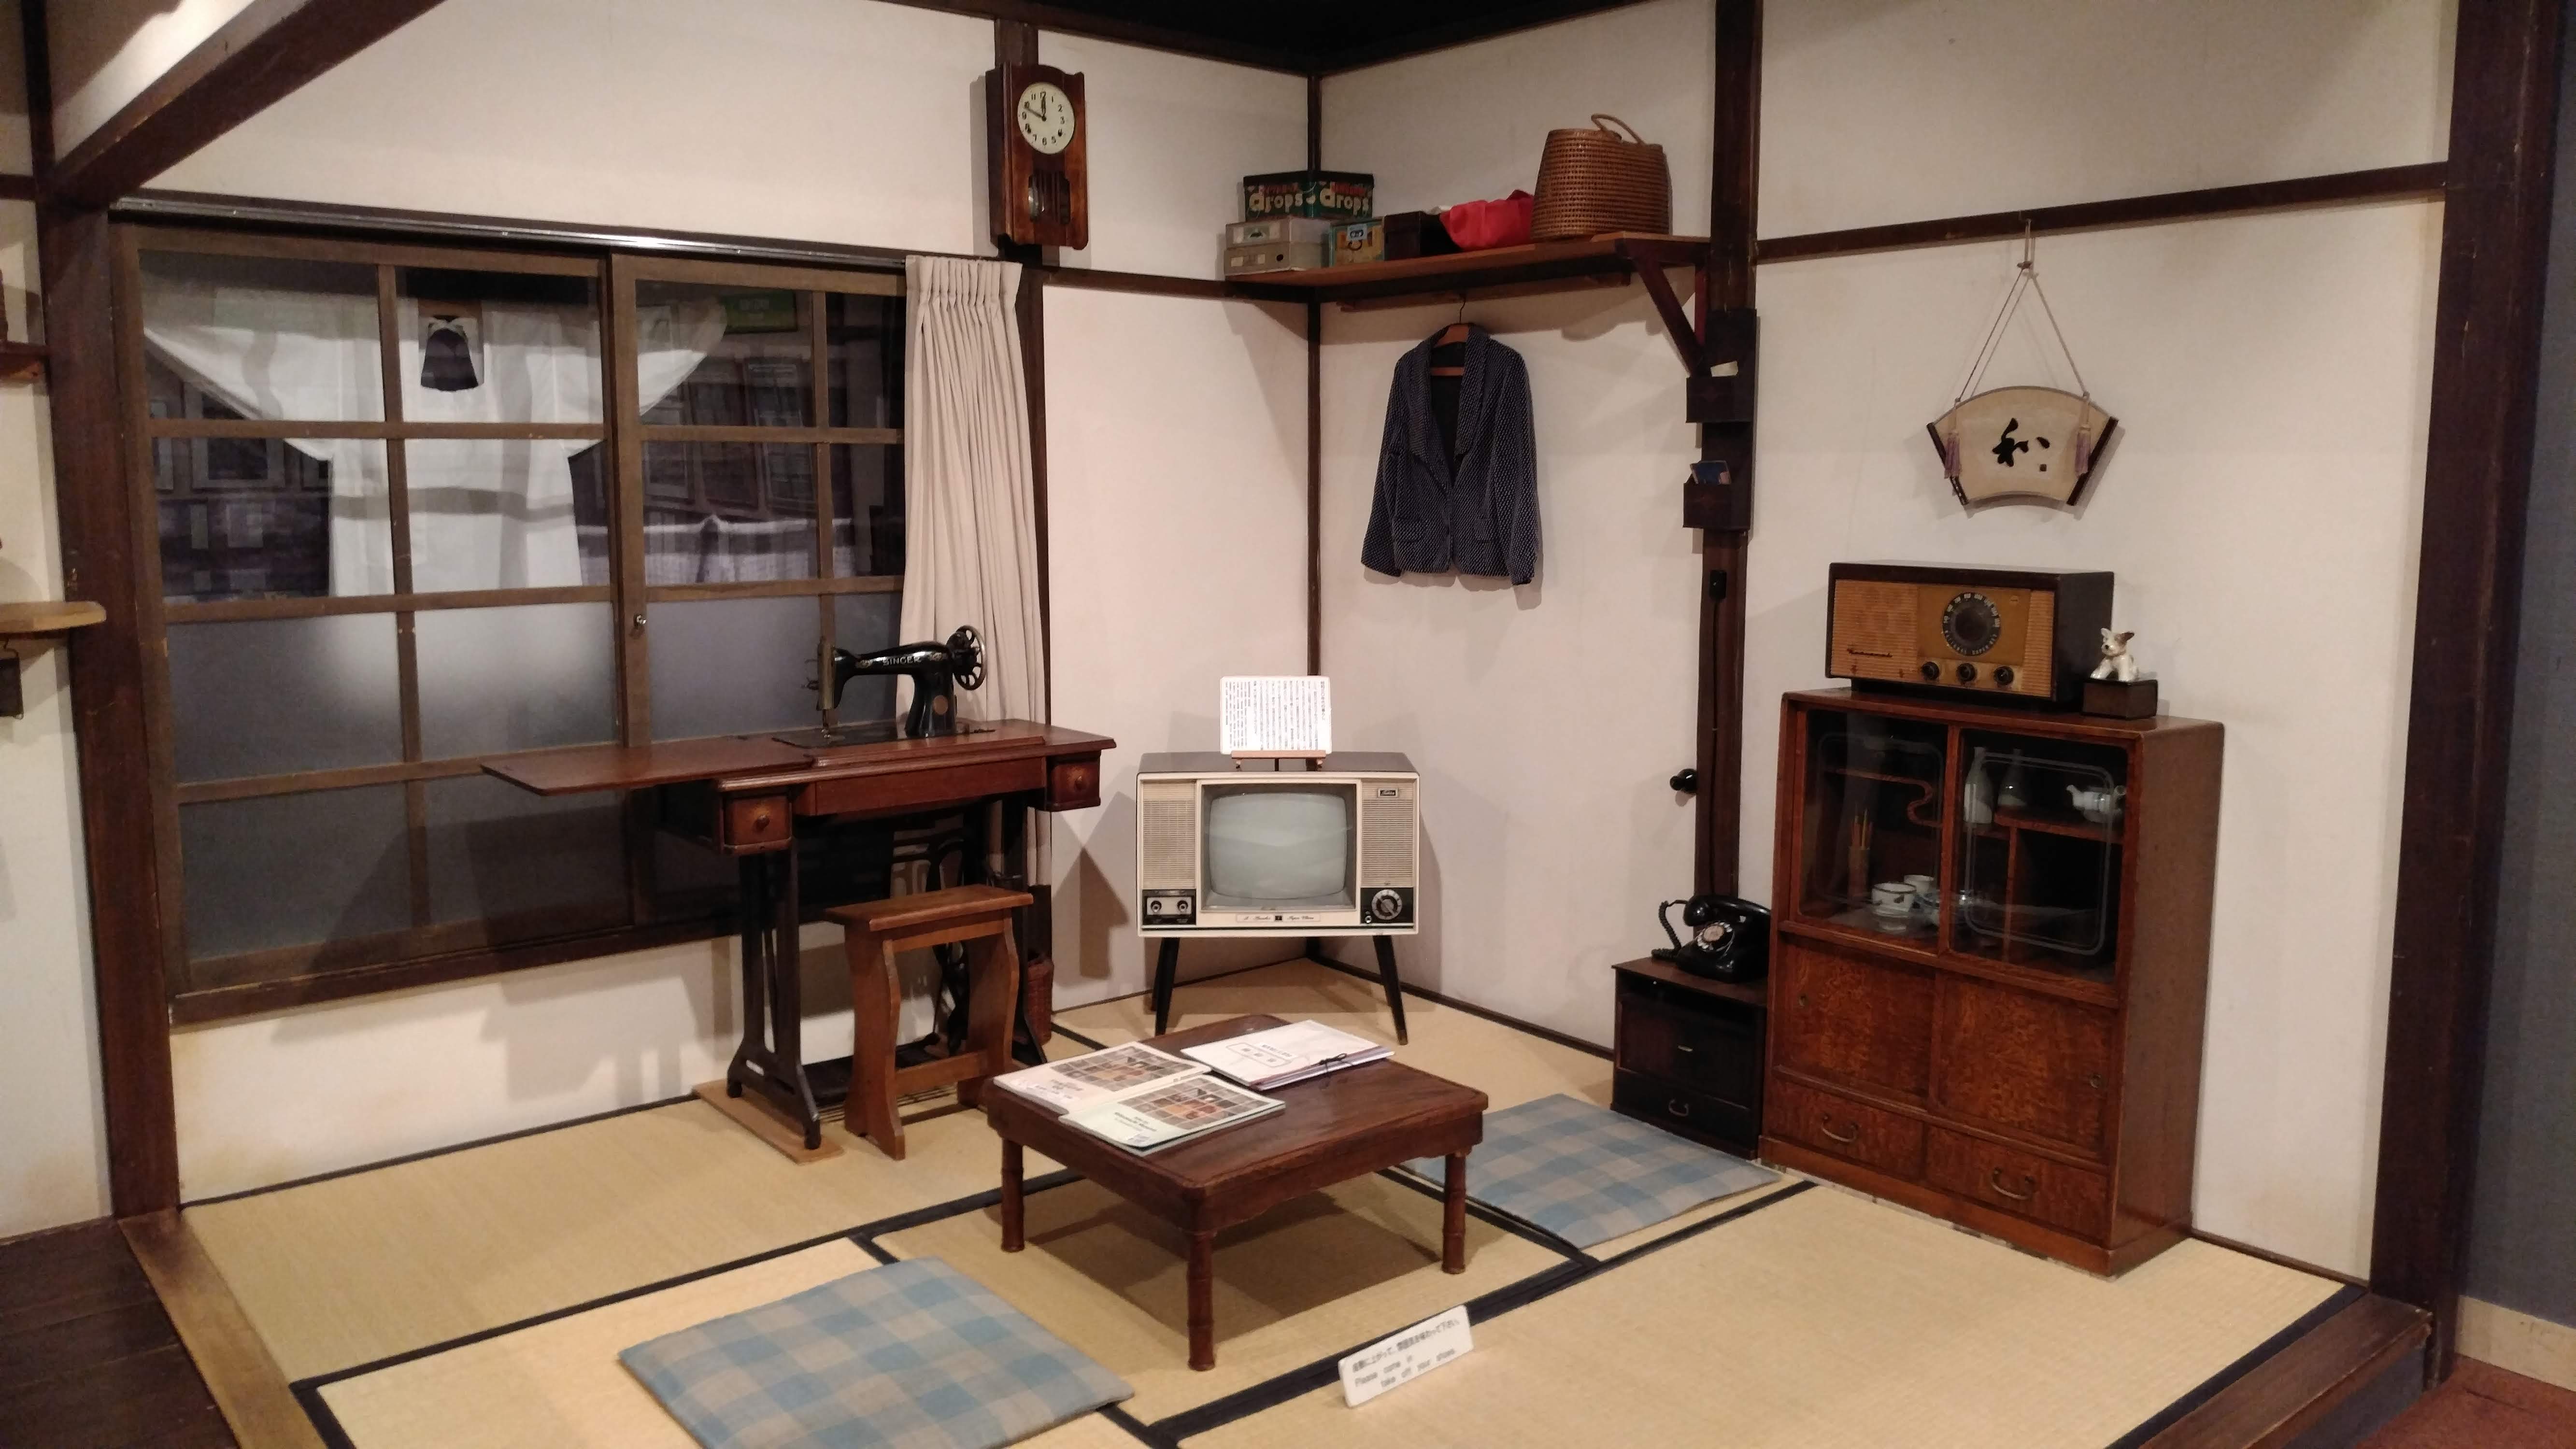 a mockup of a japanese living room from likely the 50's